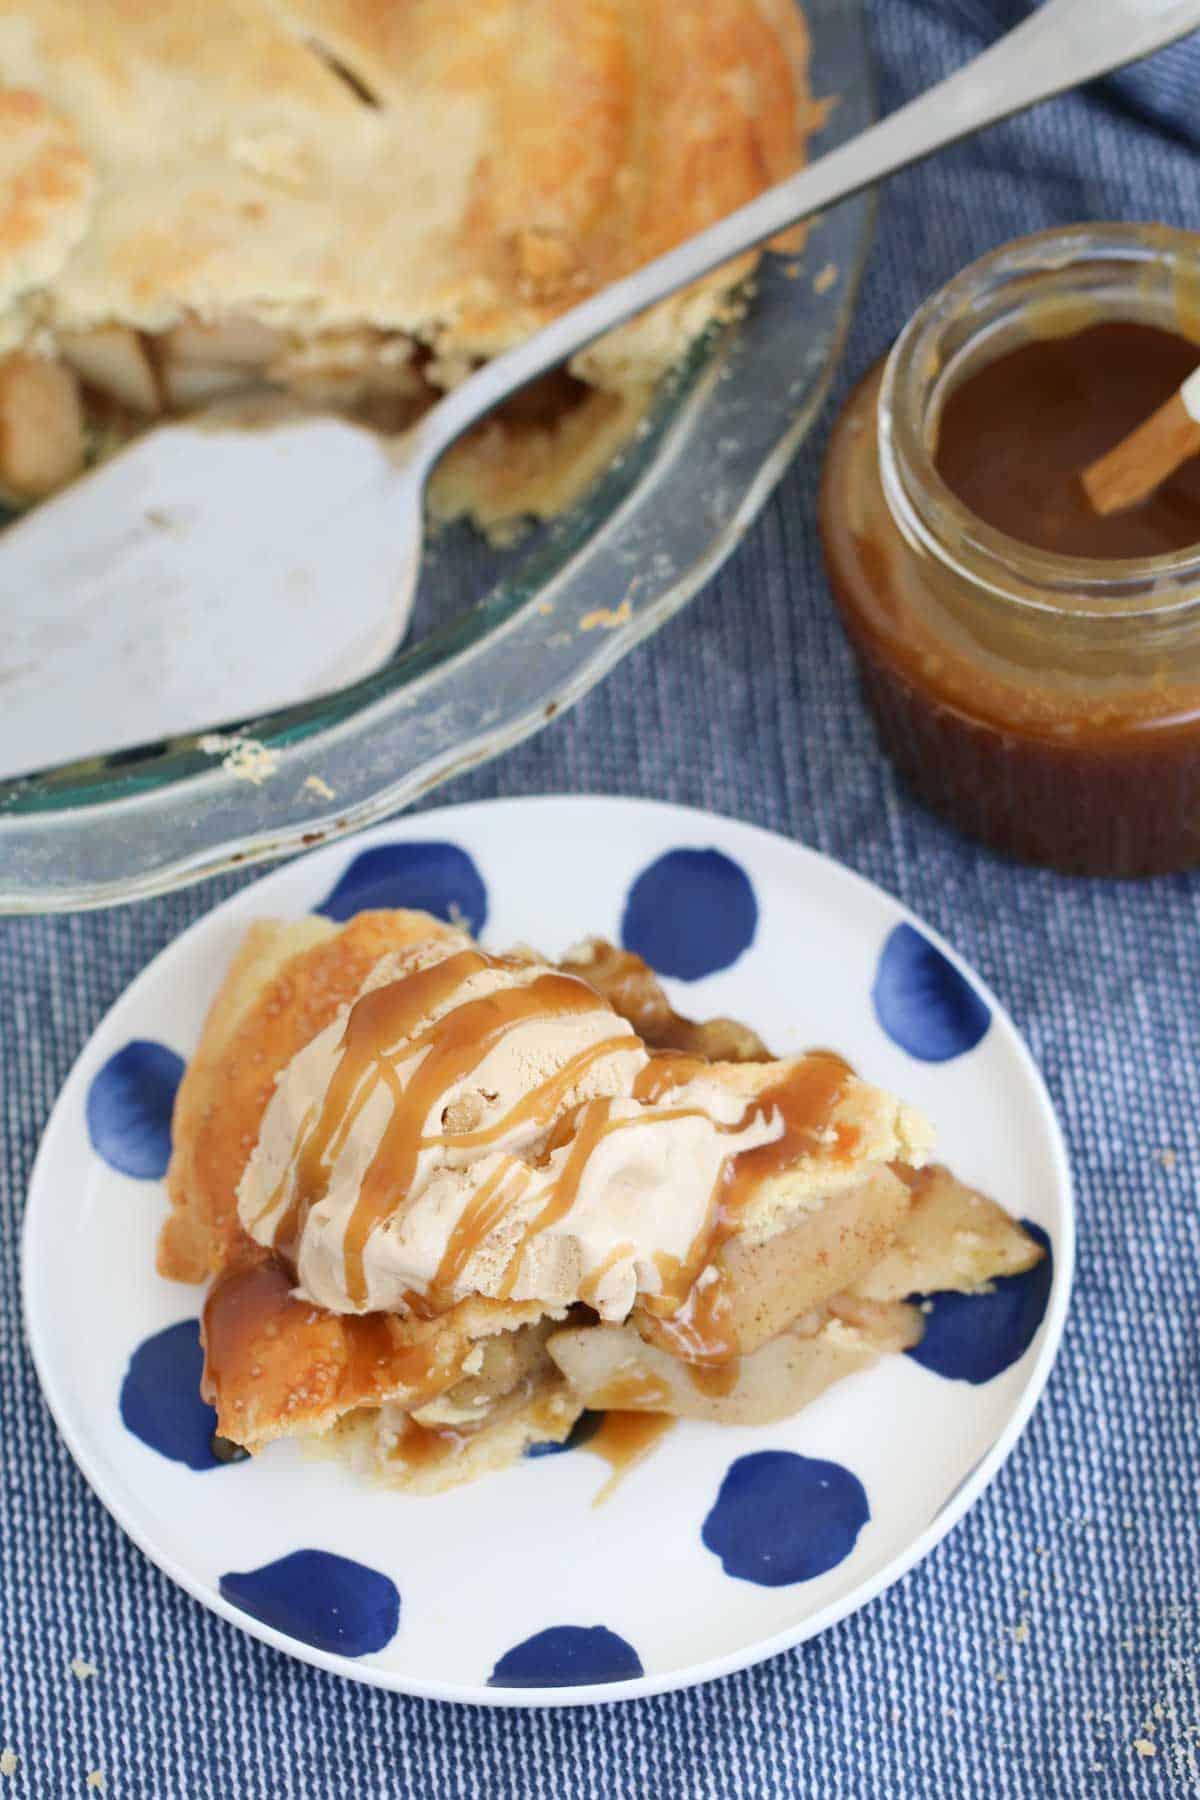 Caramel sauce drizzled over a slice of dessert pie with ice cream.